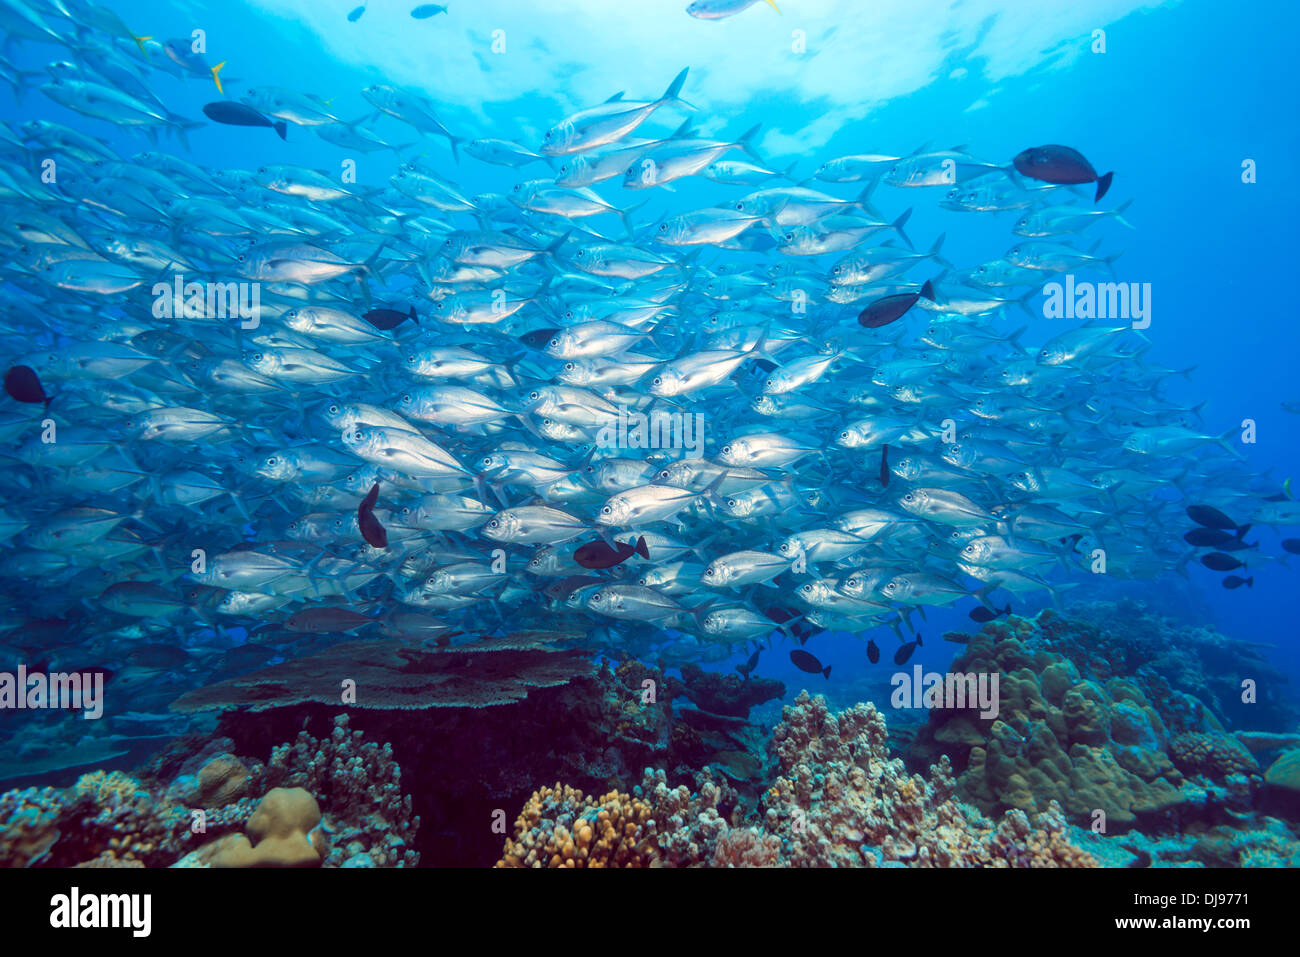 School of Jackfish over a Coral Reef, Ulong Channel, Rock Islands Nationalpark, Micronesia, Palau Stock Photo